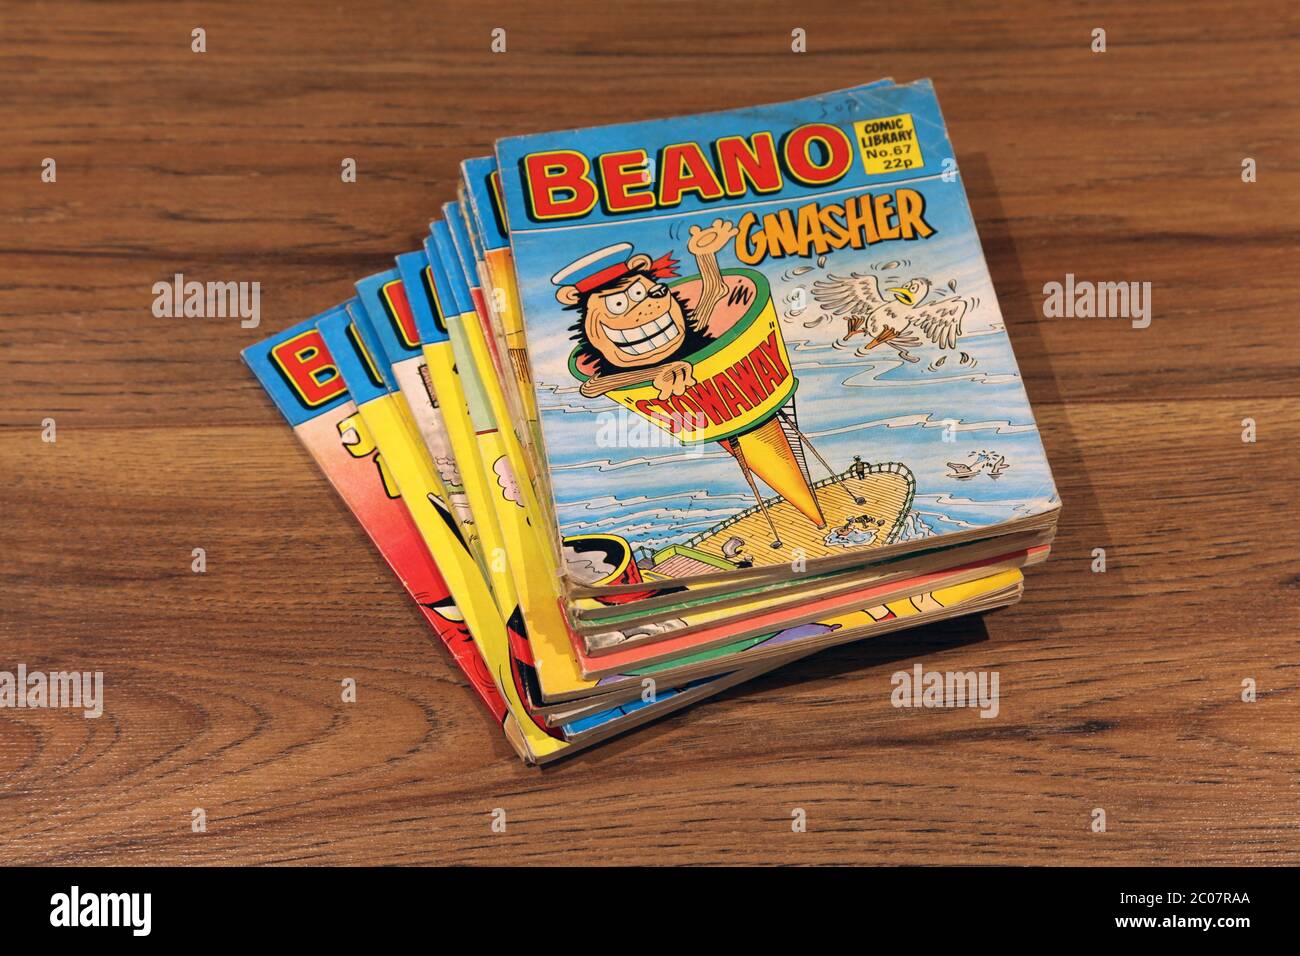 Beano Comic Library No.67 1985 "Gnasher in Stowaway" stacked in a pile of Beano comics Stock Photo